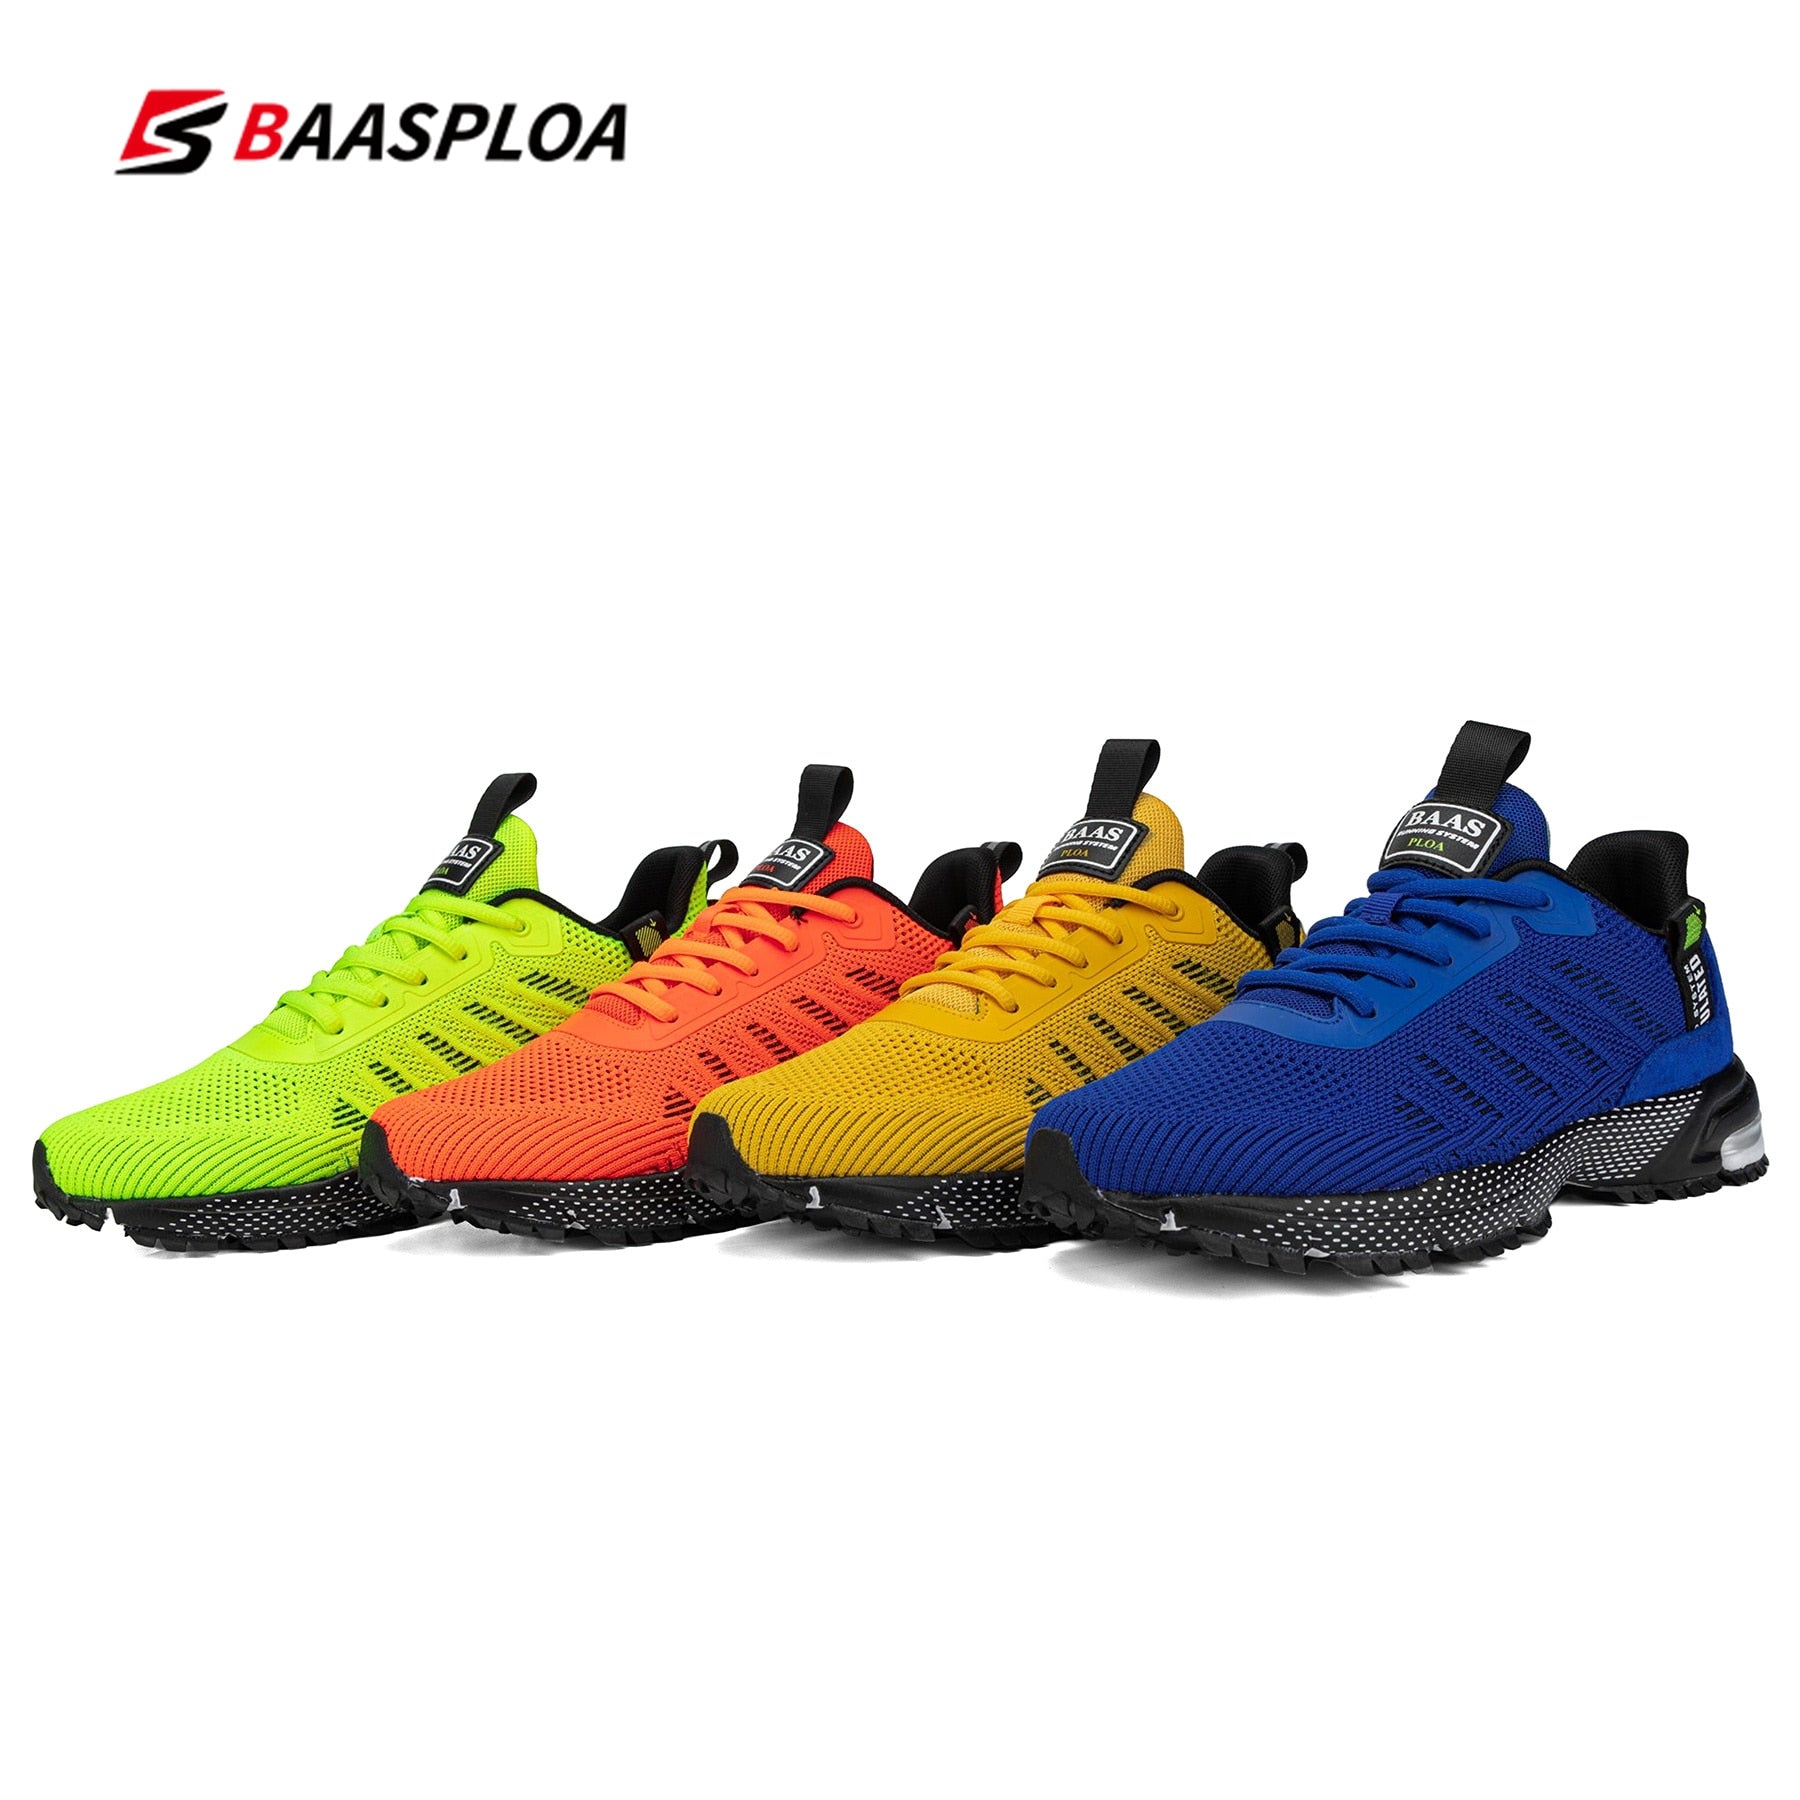 Professional Running Shoes For Men.